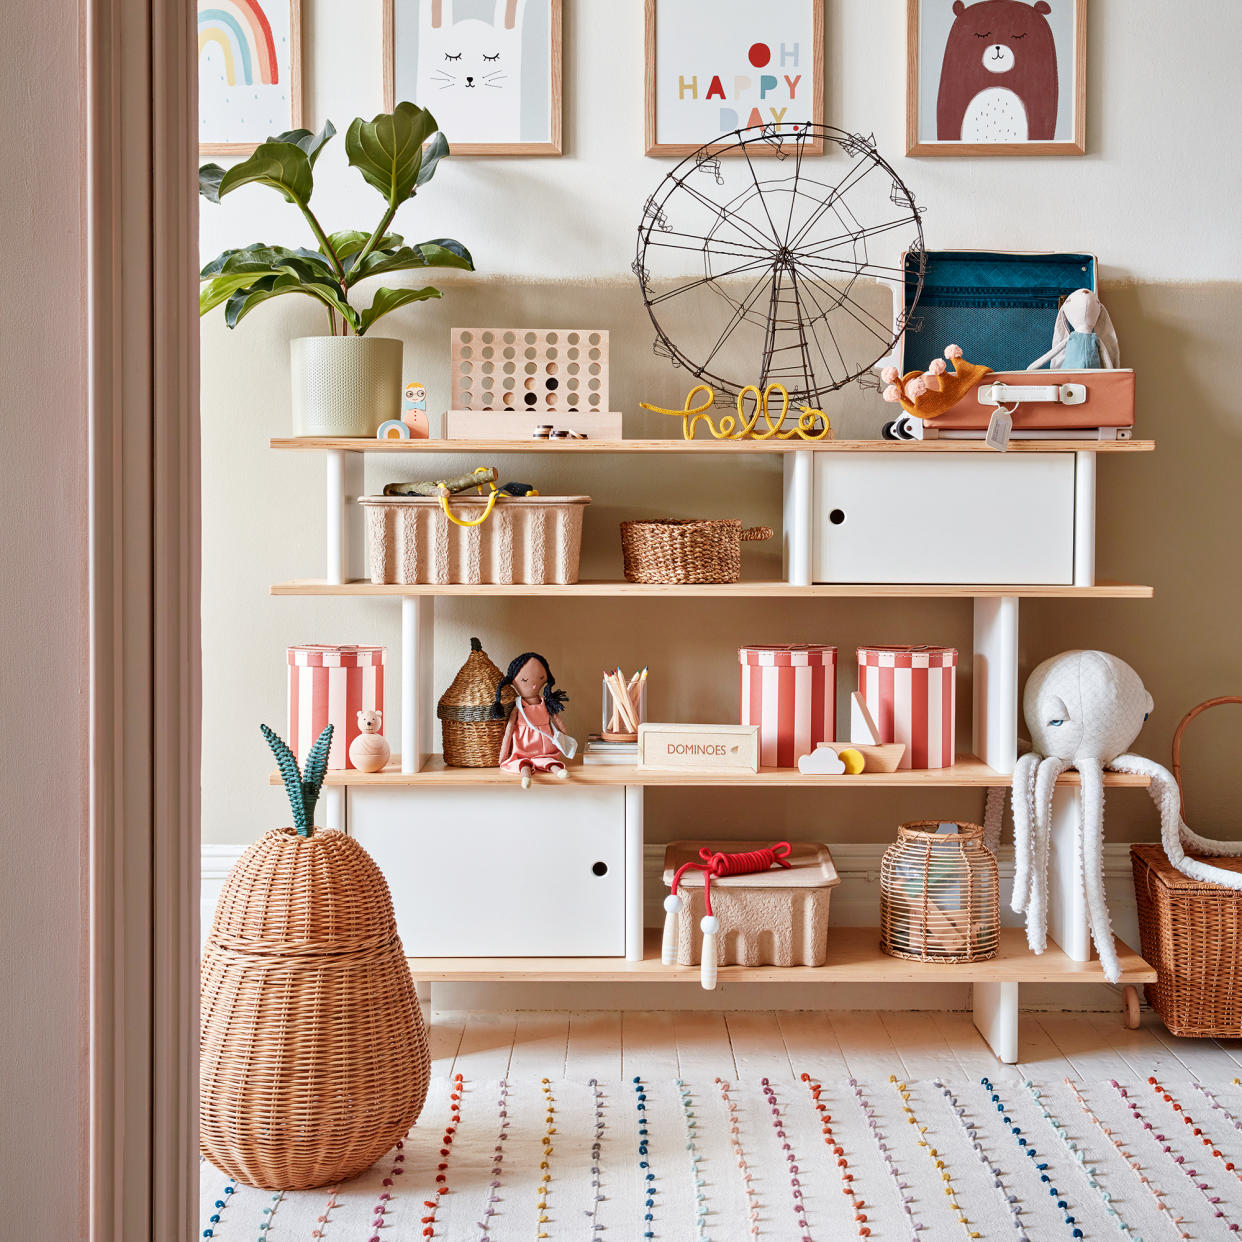  Pink and white open shelving unit in a kids' room, with baskets for organising. 